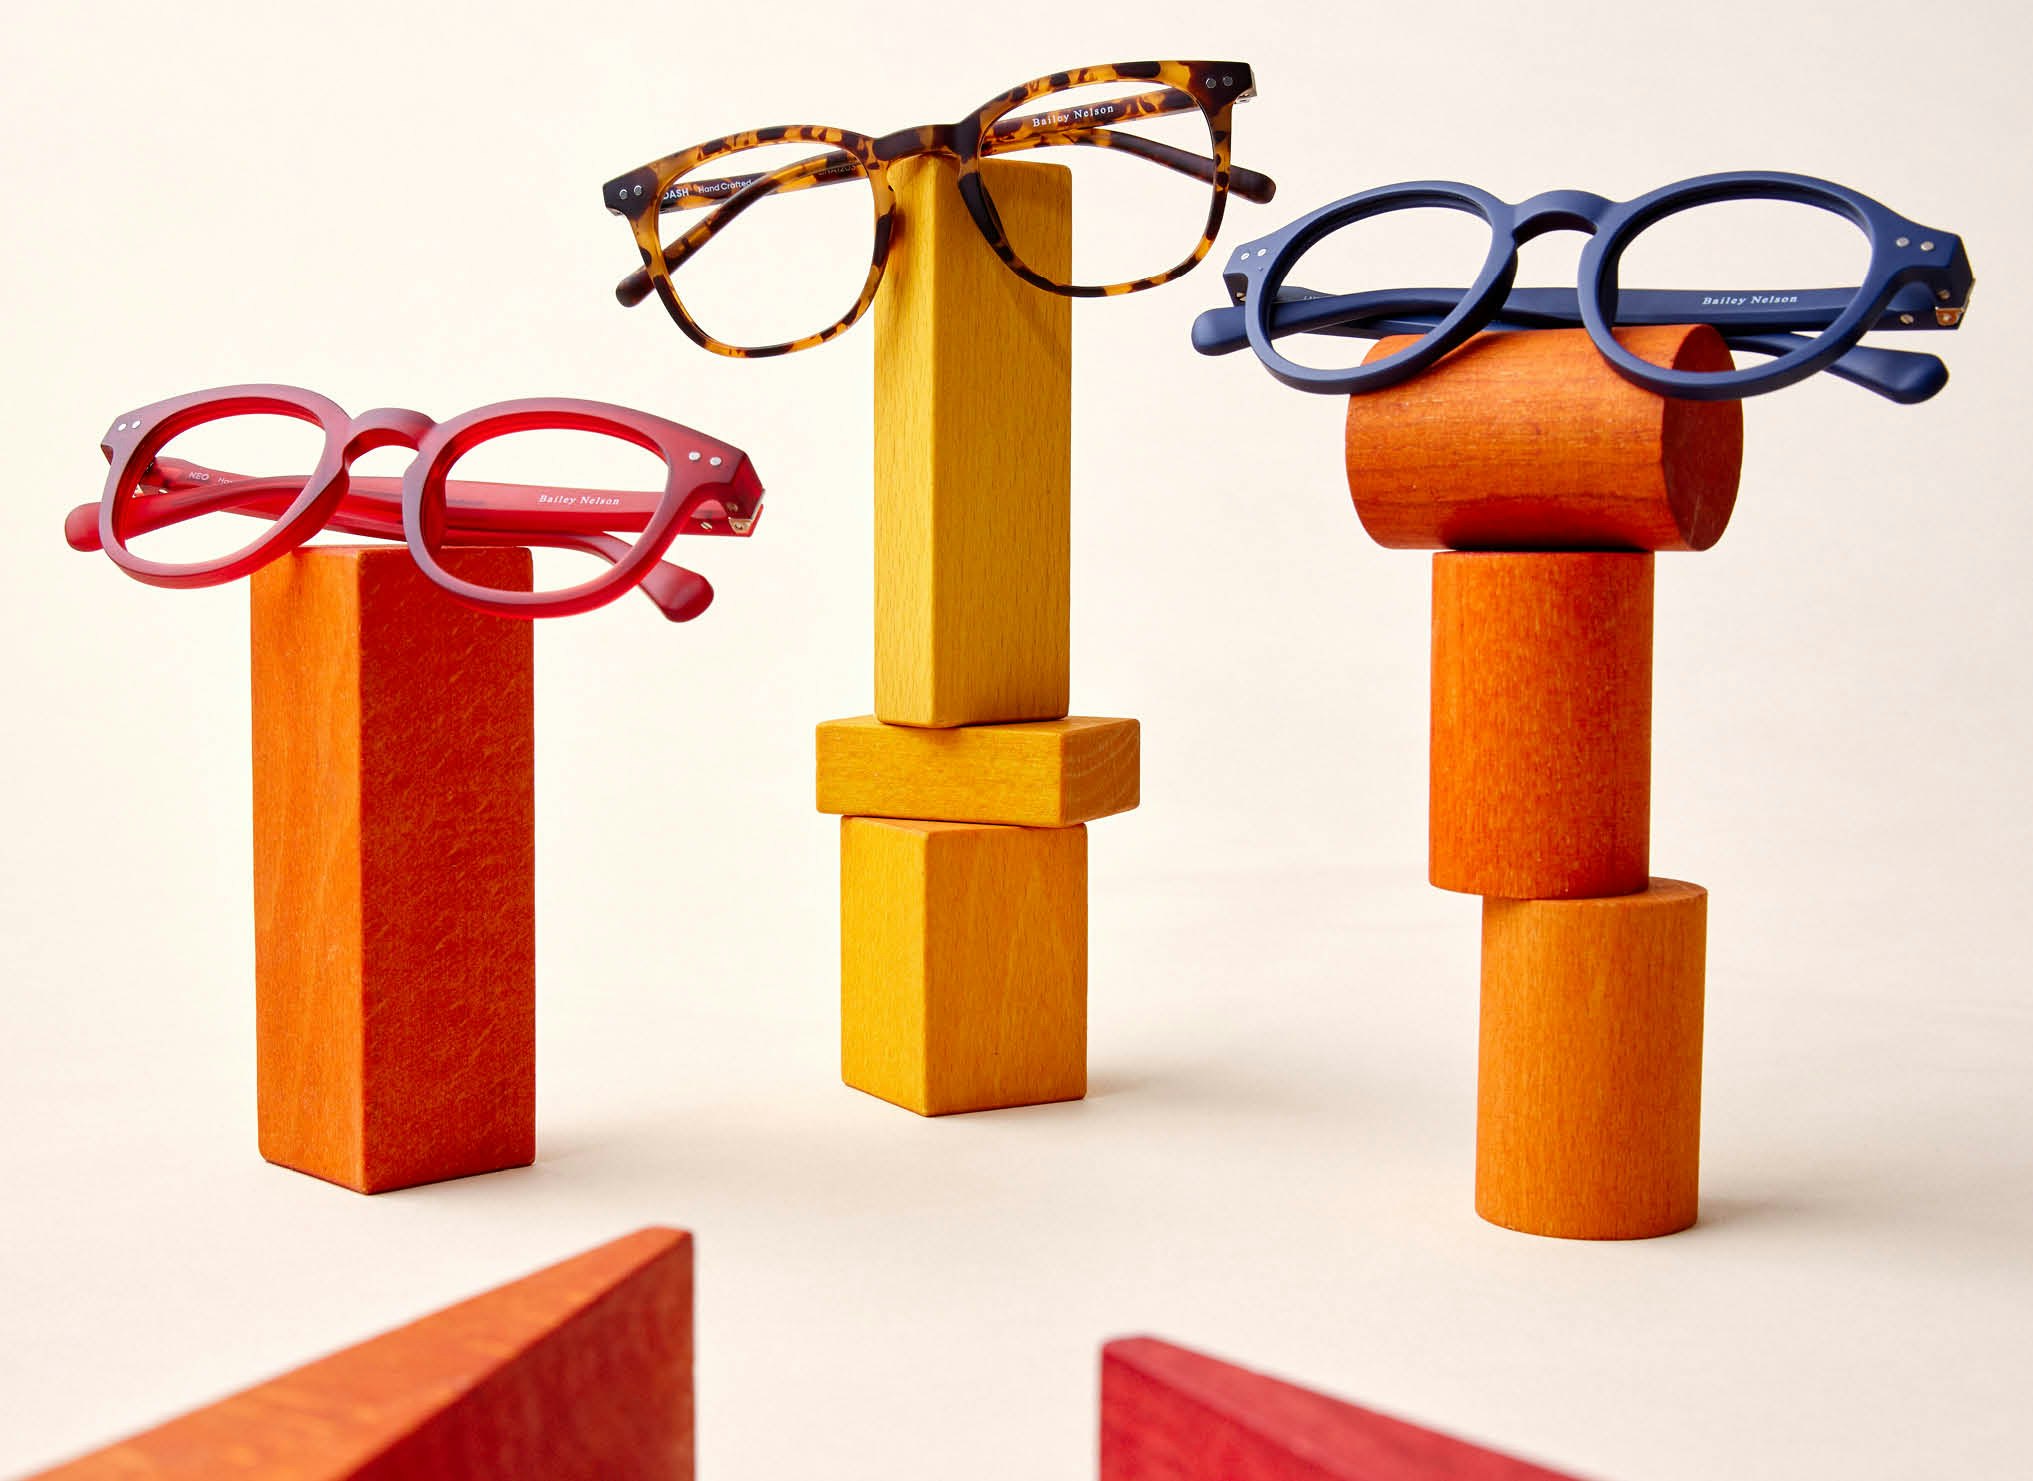 Bailey Nelson acetate kids frames displayed on colourful wooden blocks